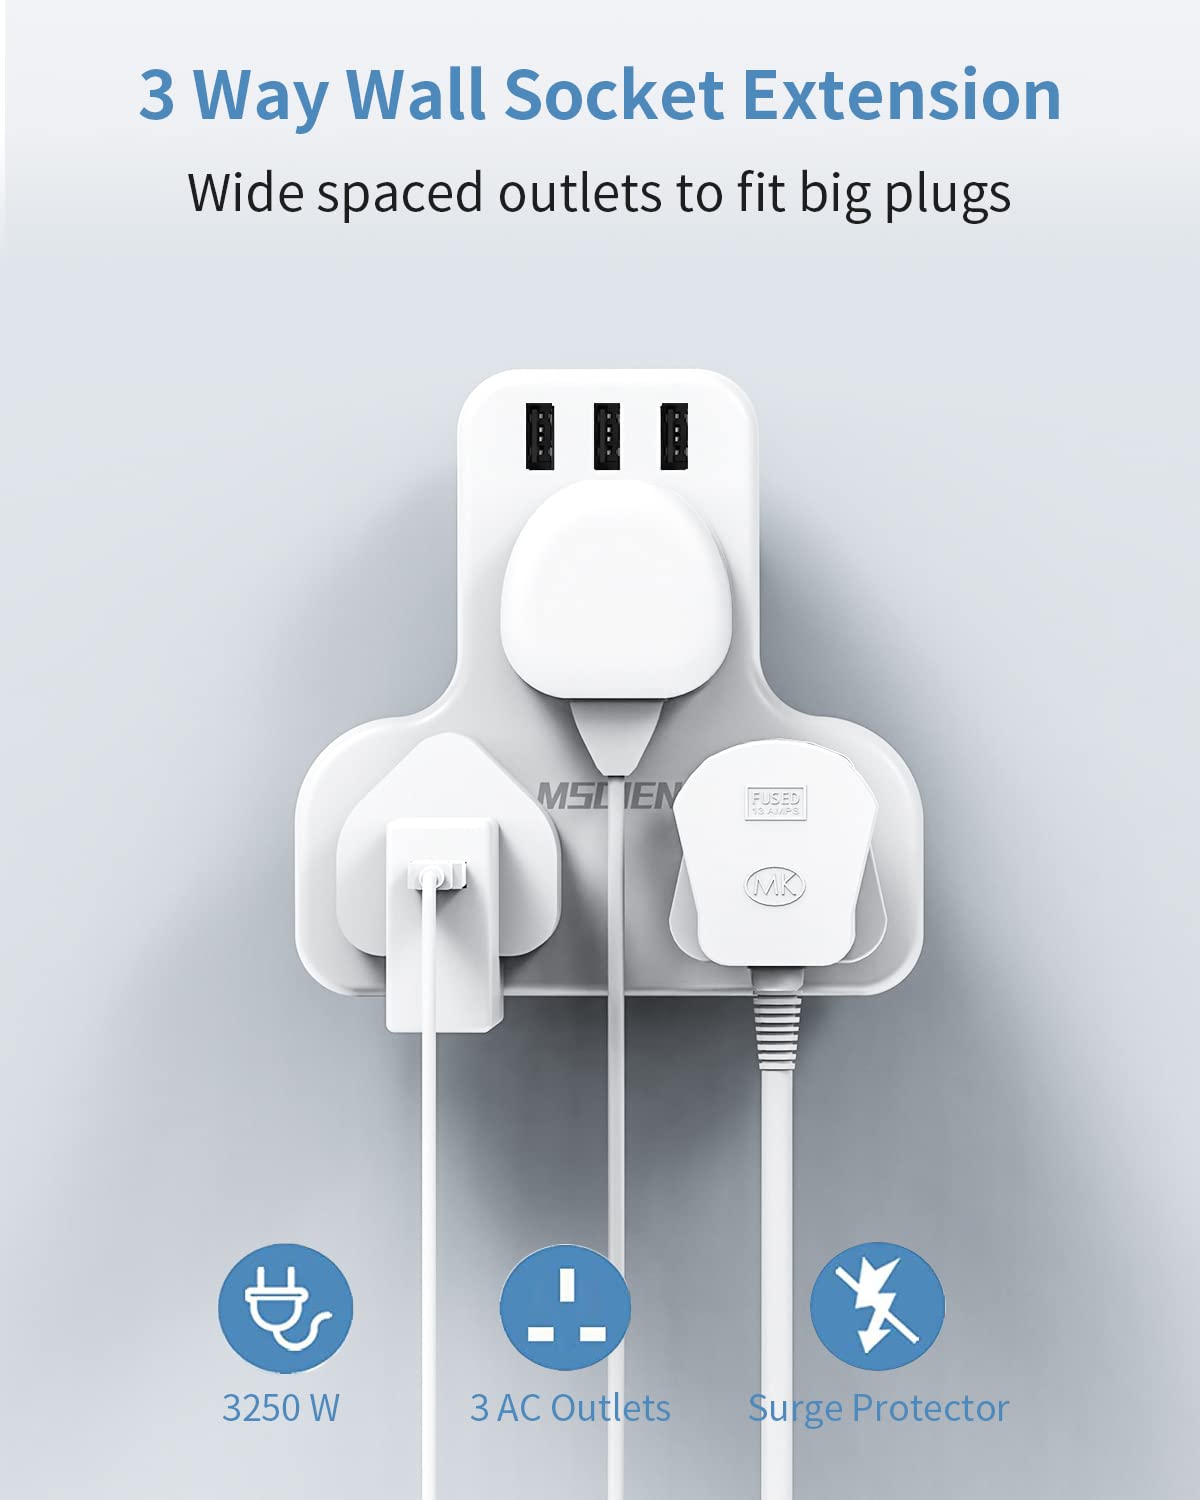 Mscien 3 Way Plug Extension with USB, Multi Plug Extension Sockets with 3 USB, Wall Plug Adapter Turn 1 into 3, Compact Power Extension Adapter